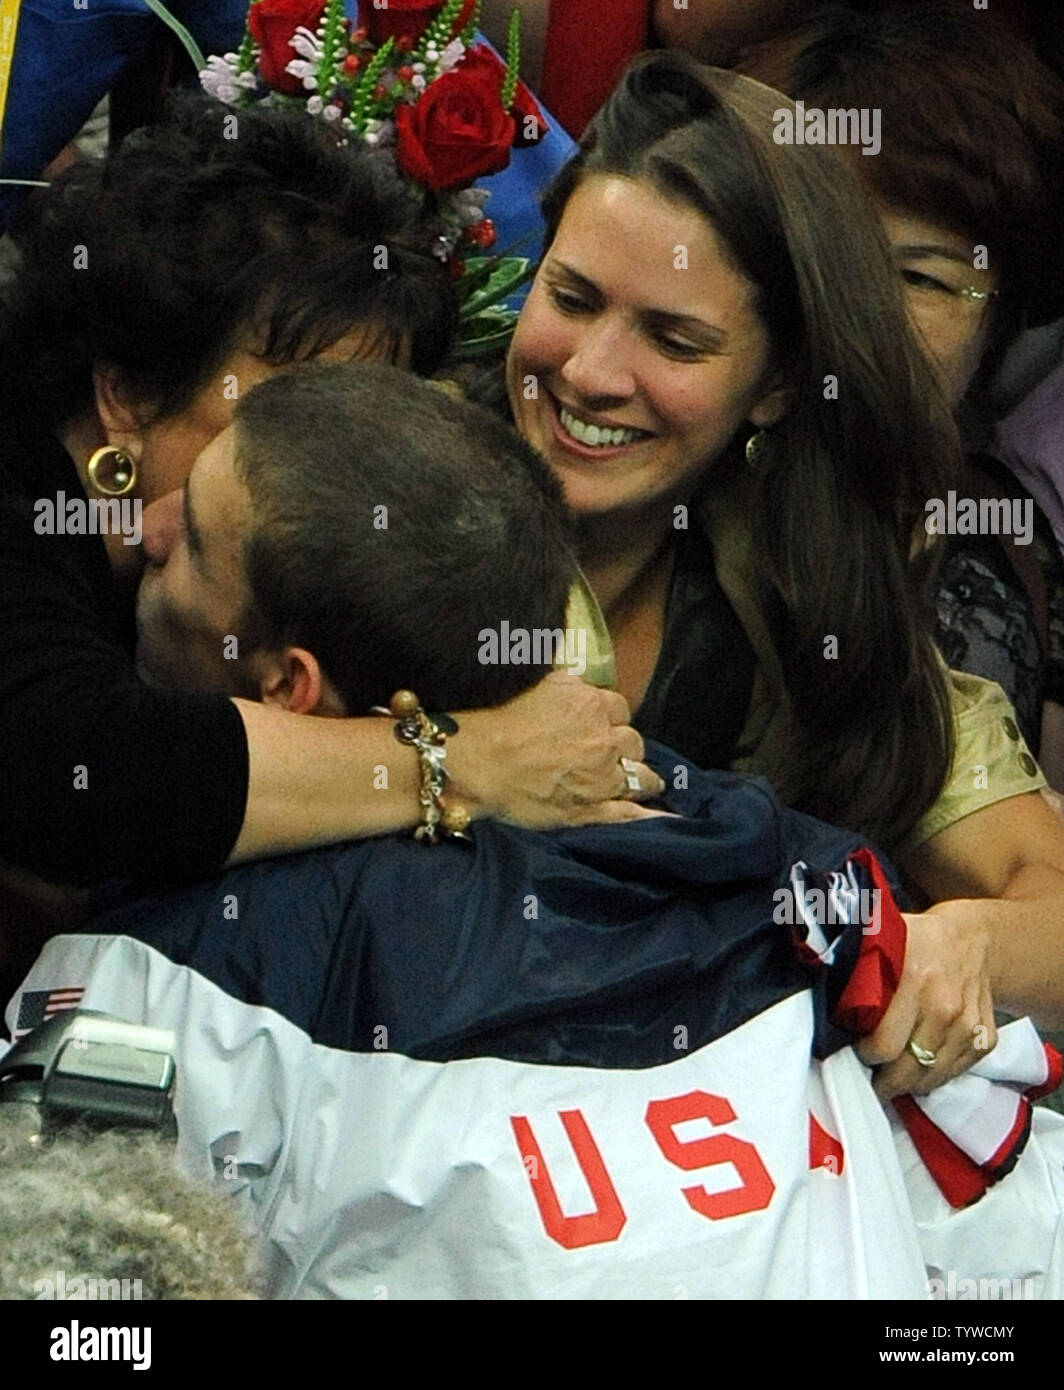 USA's Michael Phelps is congratulated by his mother and sister after the US team received their medals for the Men's 4x100M Medley, setting a world record of 3:29.34, at the National Aquatic Center (Water Cube) during the 2008 Summer Olympics in Beijing, China, on August 17, 2008.  Phelps set the world record for medals in a single Olympics with 8, passing Mark Spitz.    (UPI Photo/Roger L. Wollenberg) Stock Photo